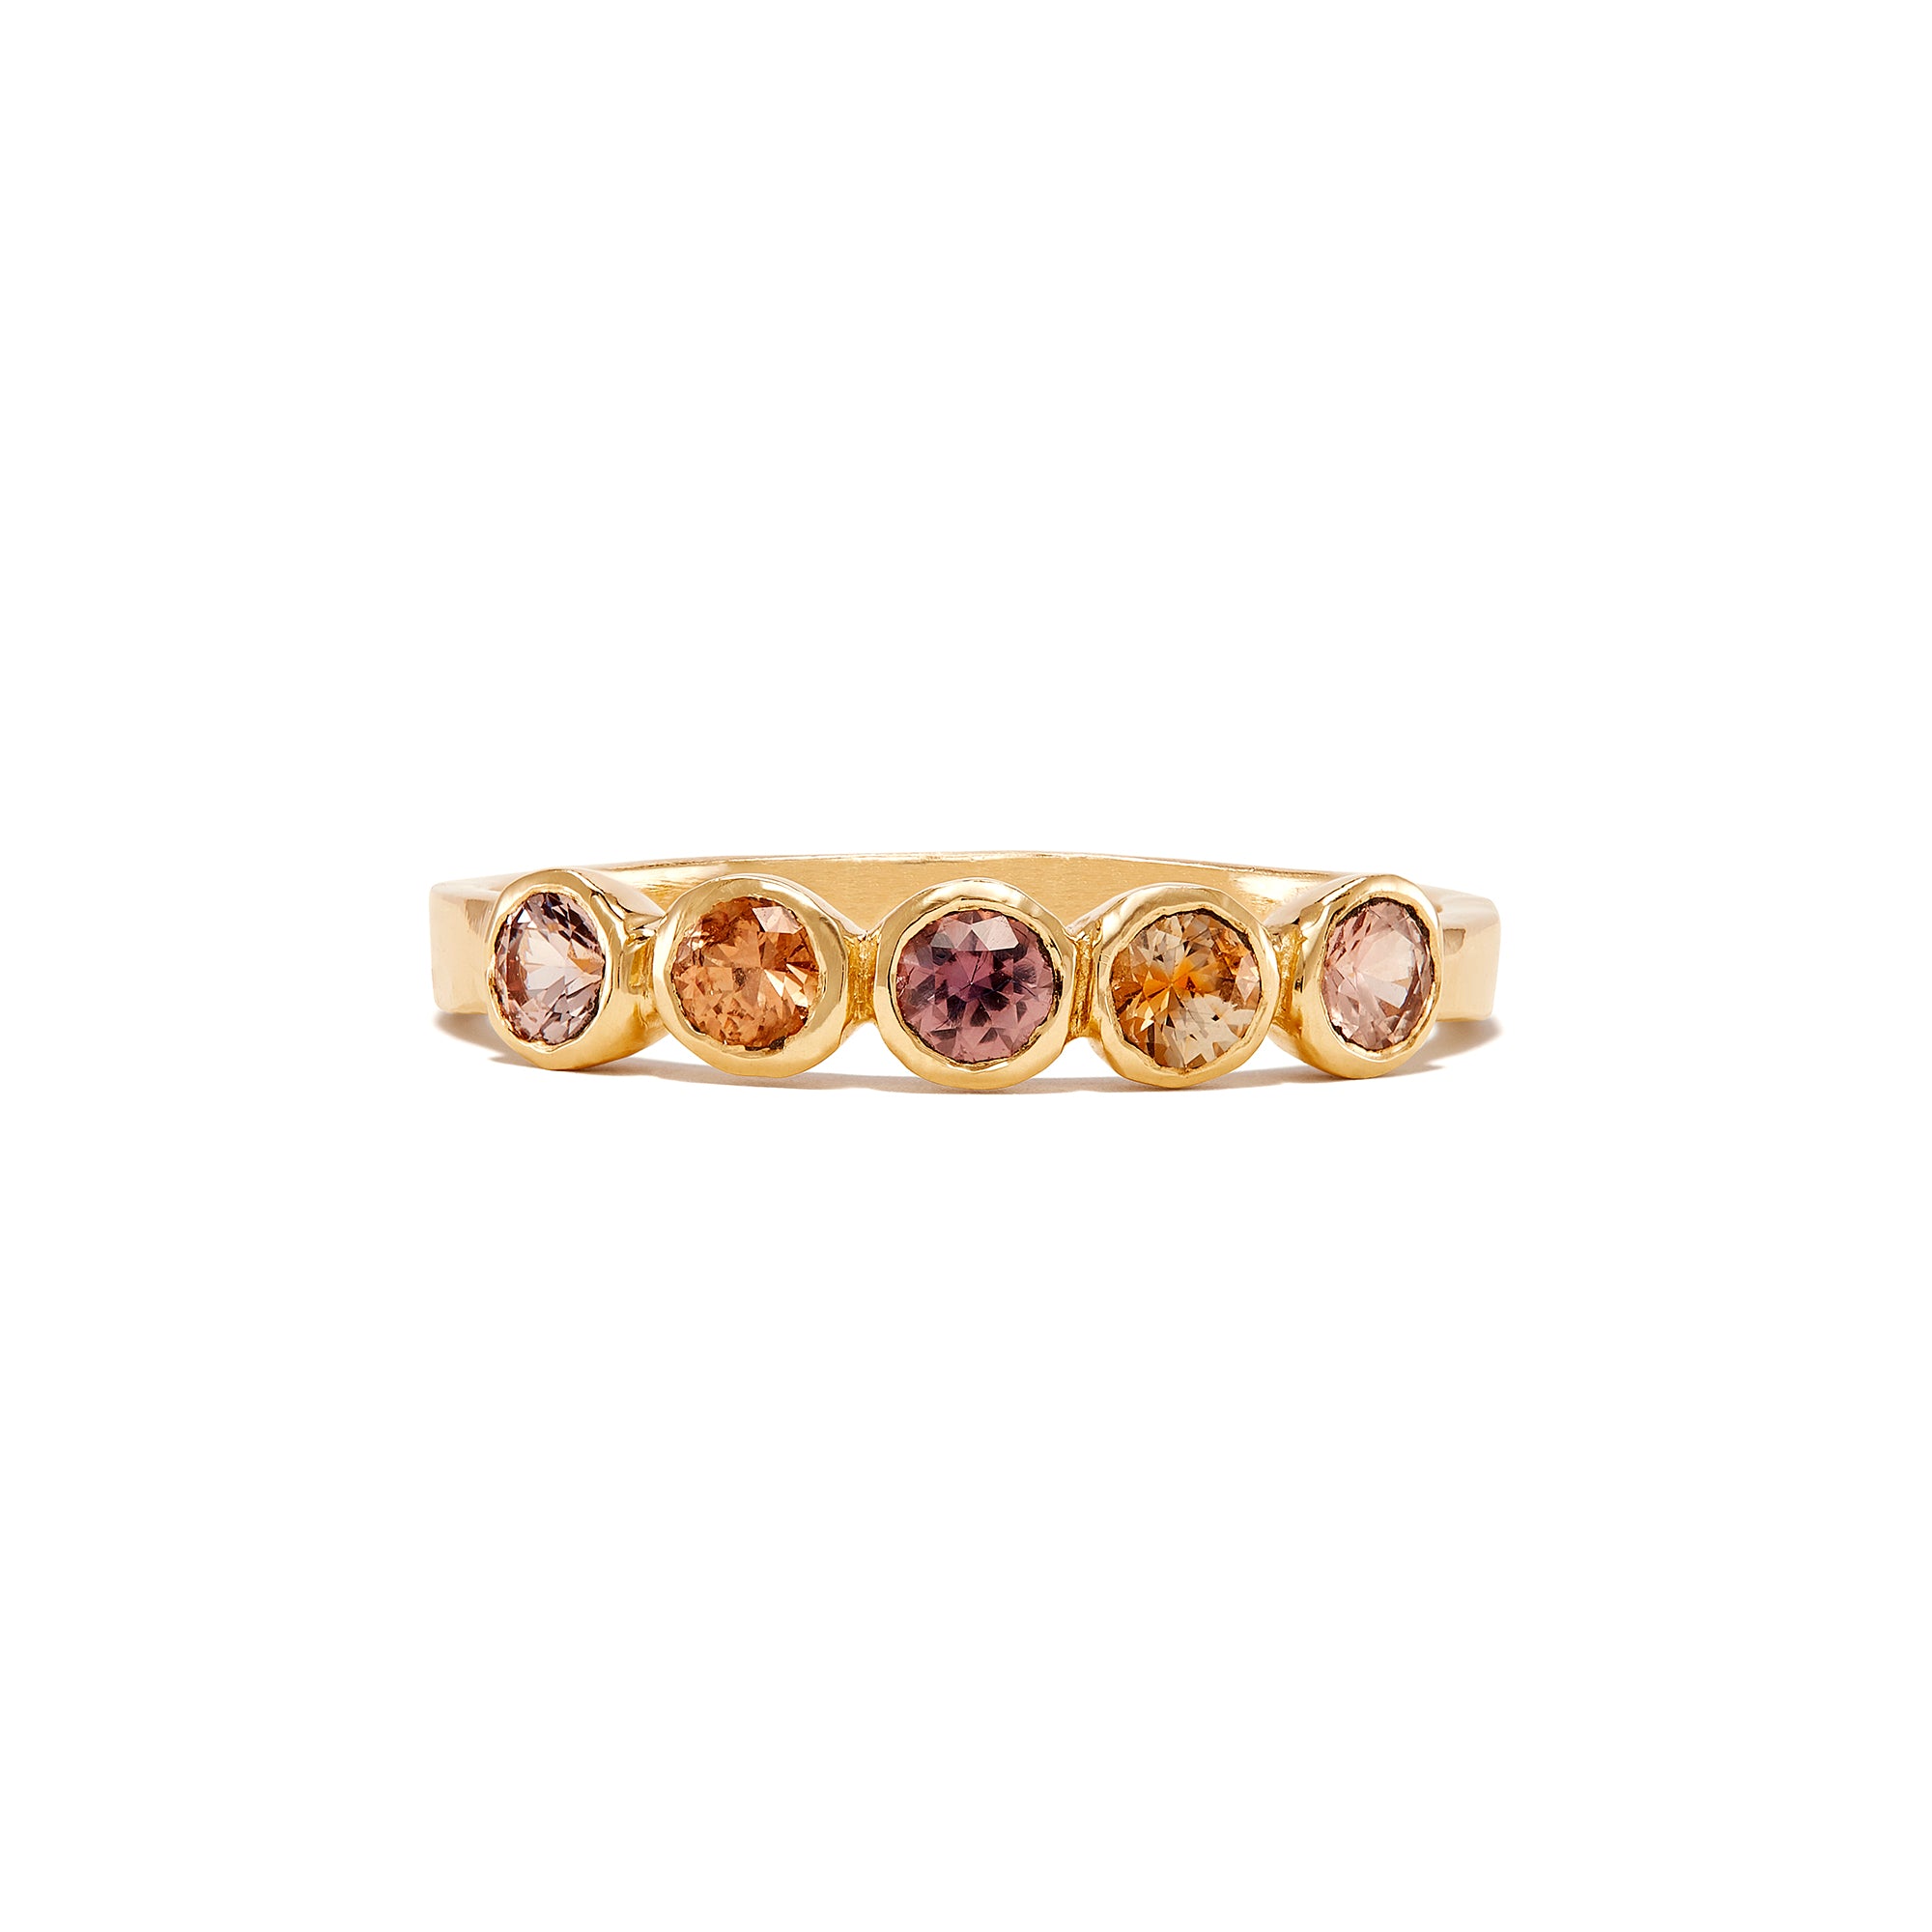 Limited Edition Pink Montana Sapphire Five Stone Ring